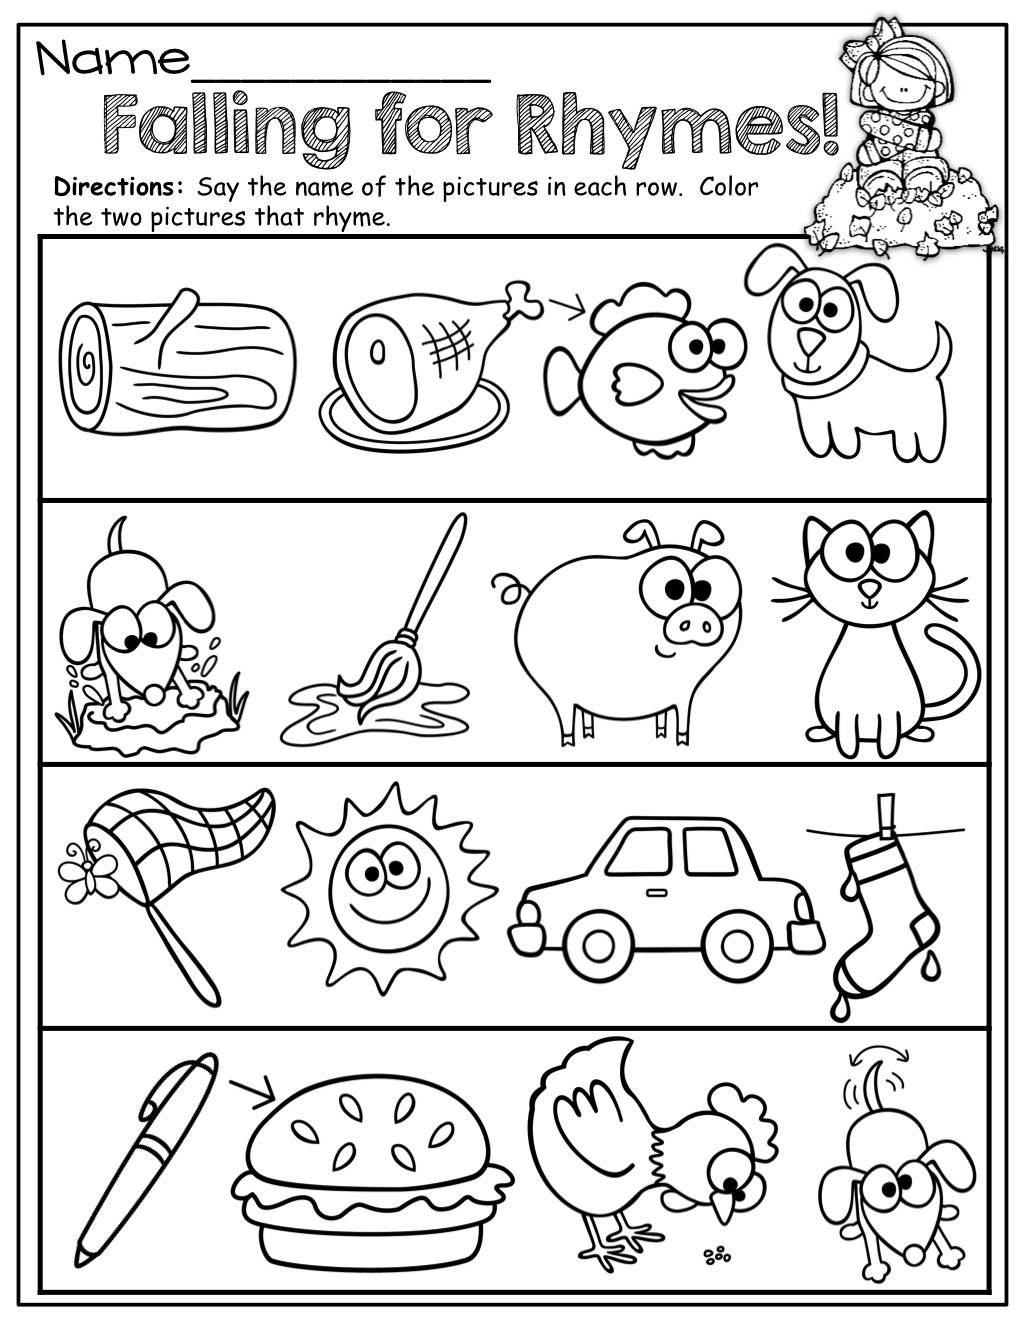 Repinnedmyslpmaterials Visit Our Page For Free Speech - Free Printable Rhyming Words Worksheets